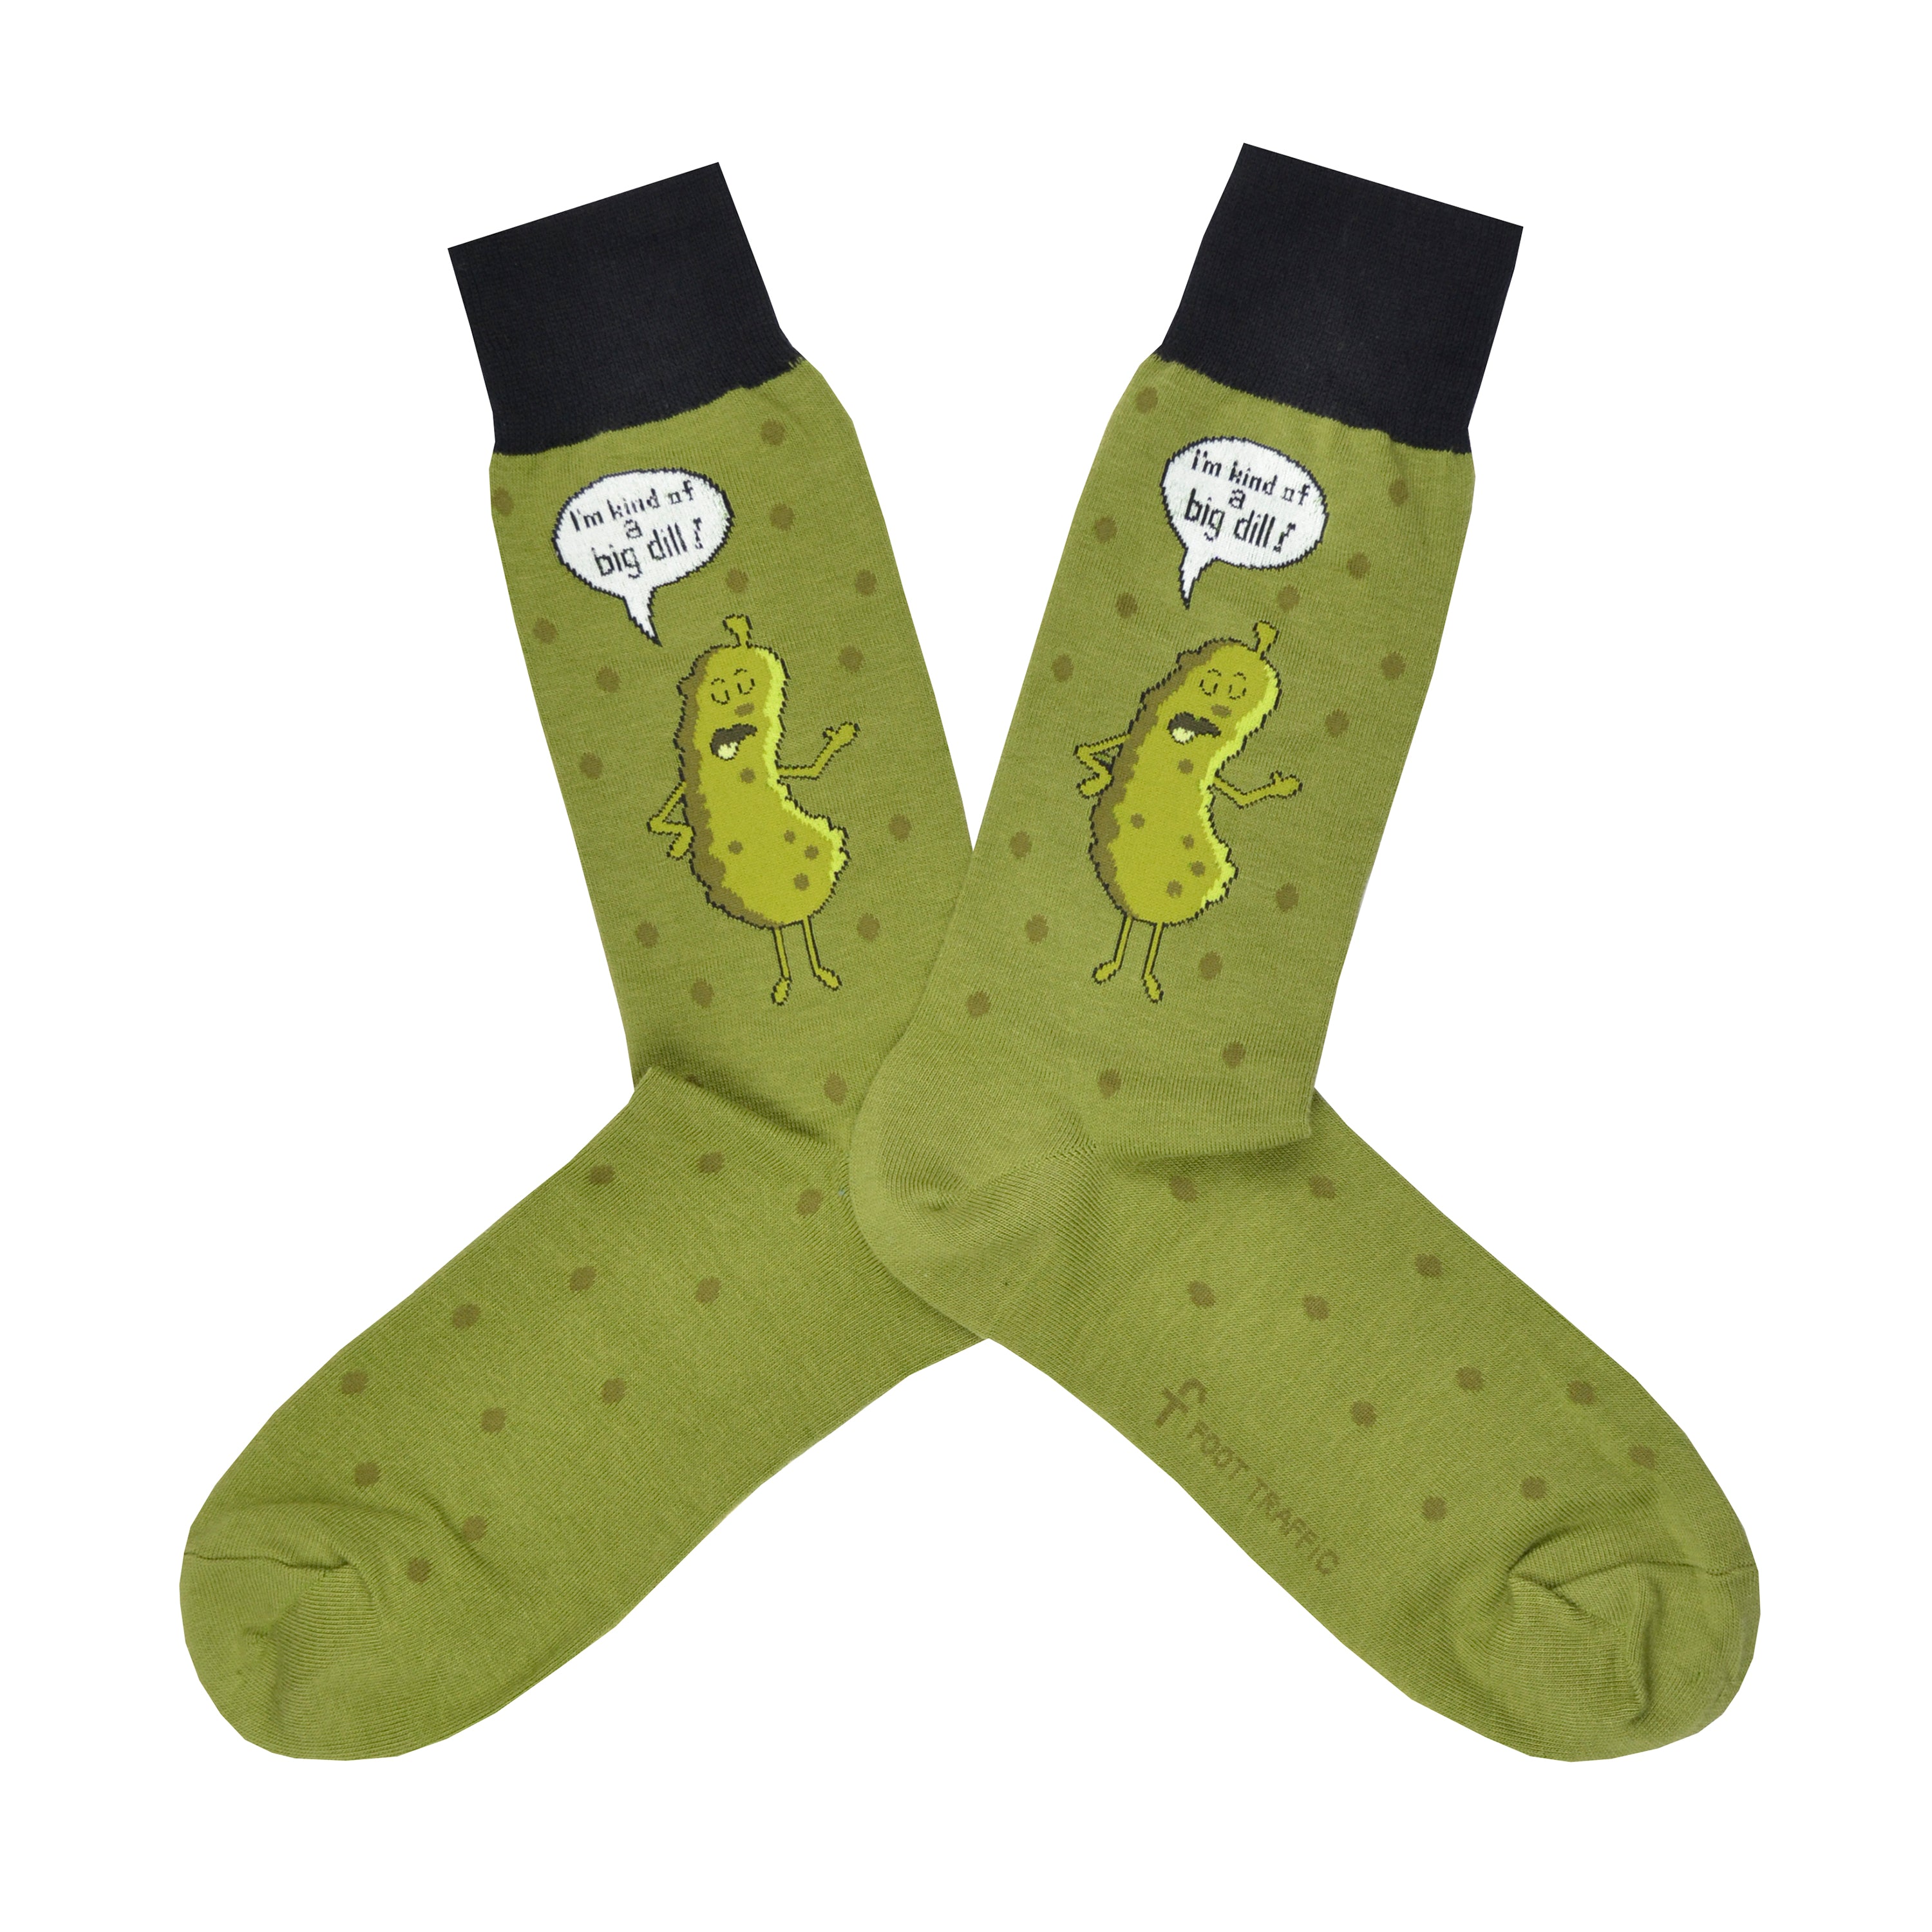 These green cotton funny men's crew socks with a black cuff by the brand Foot Traffic have a picture of a talking dill pickle on them and a word bubble that says 